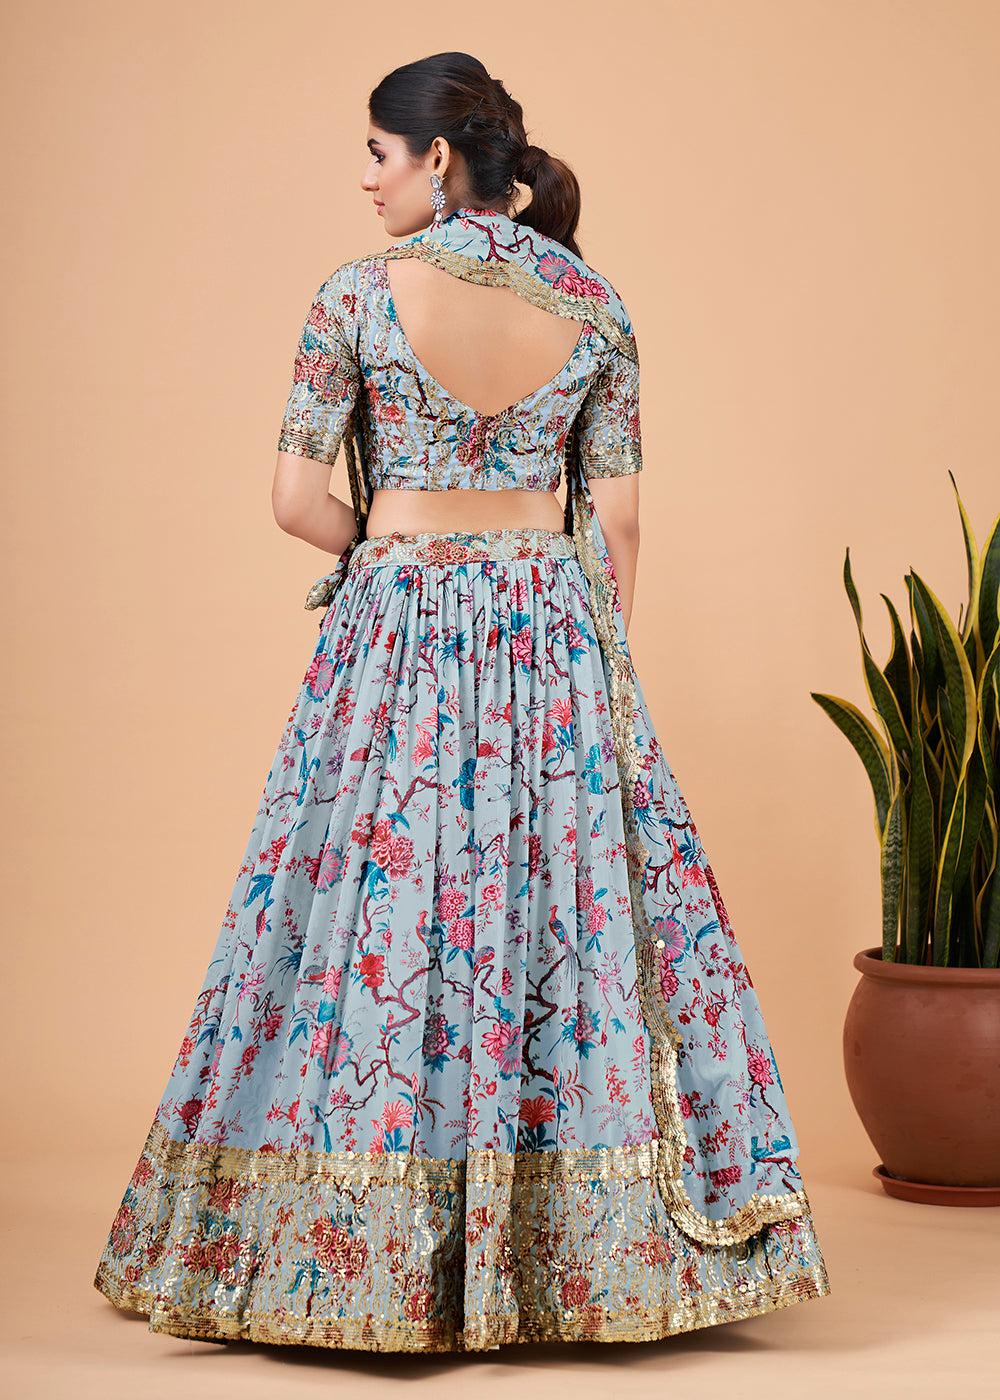 Buy Now Aristocratic Sky Blue Floral Printed Georgette Lehenga Choli Online in USA, UK, Canada & Worldwide at Empress Clothing.